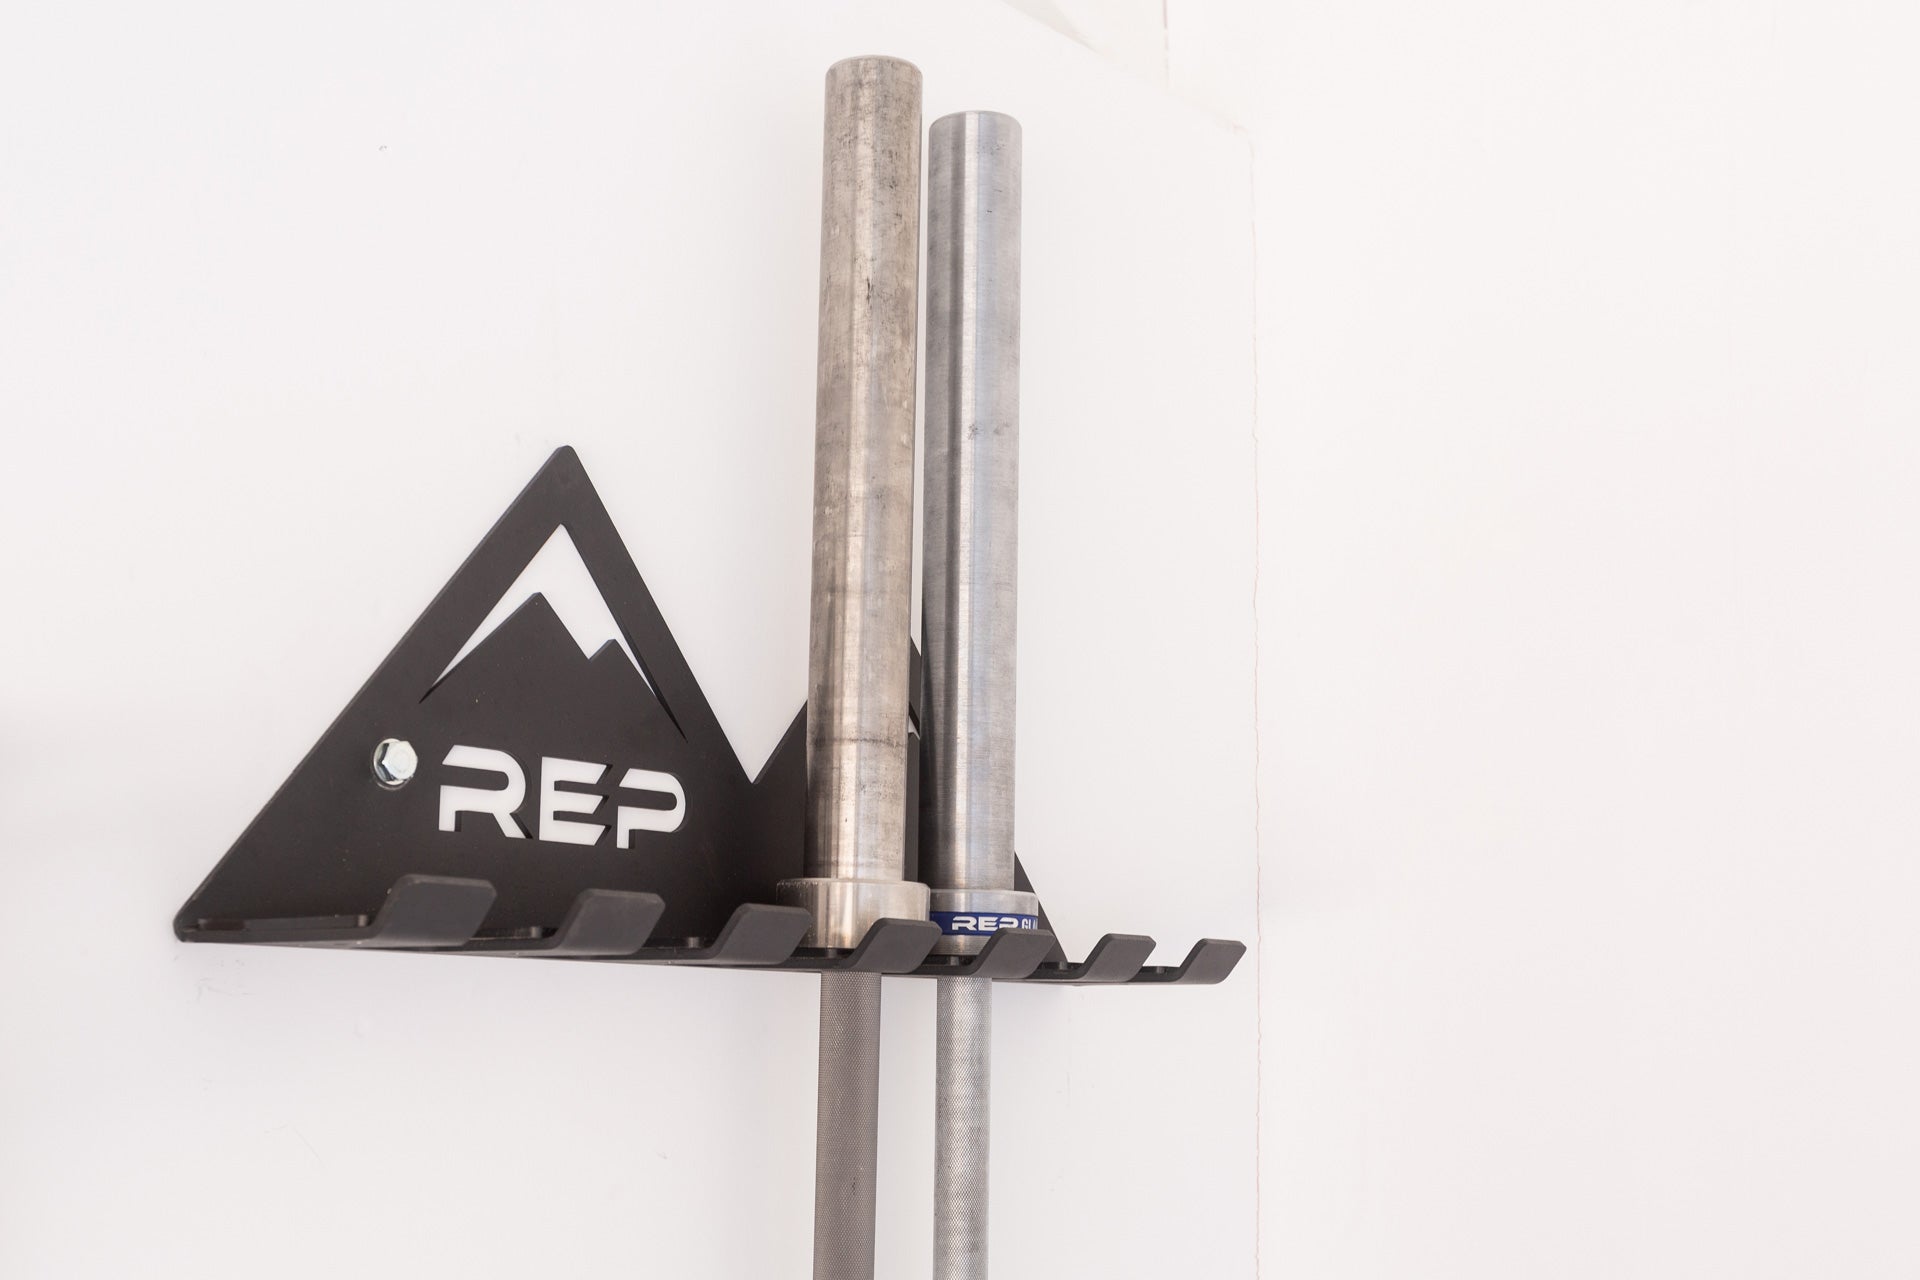 Close-up view of the REP Multi-Use Wall Storage storing two barbells.